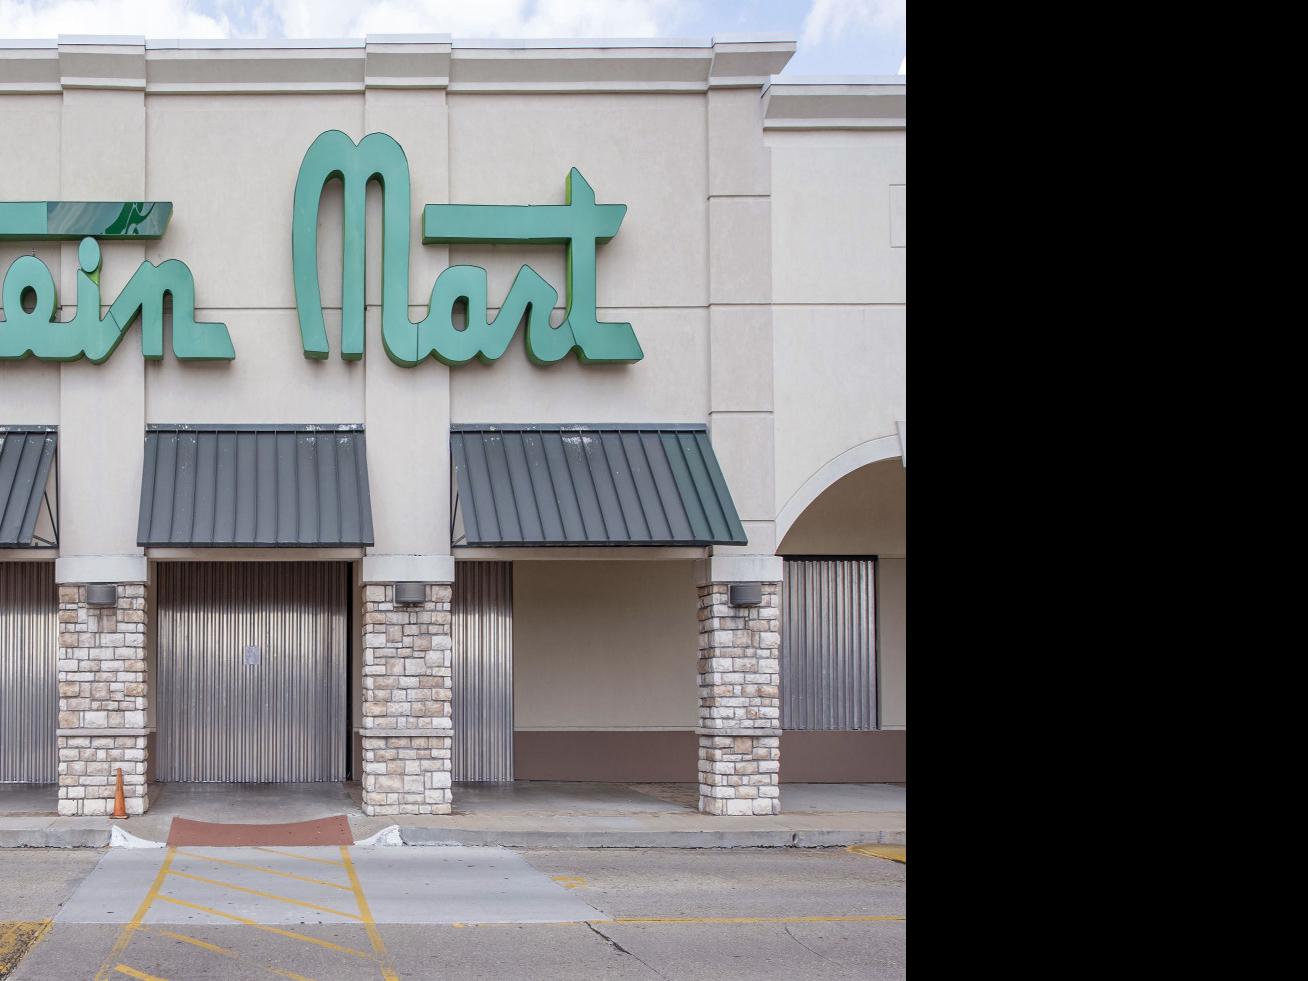 Stein Mart is being relaunched online